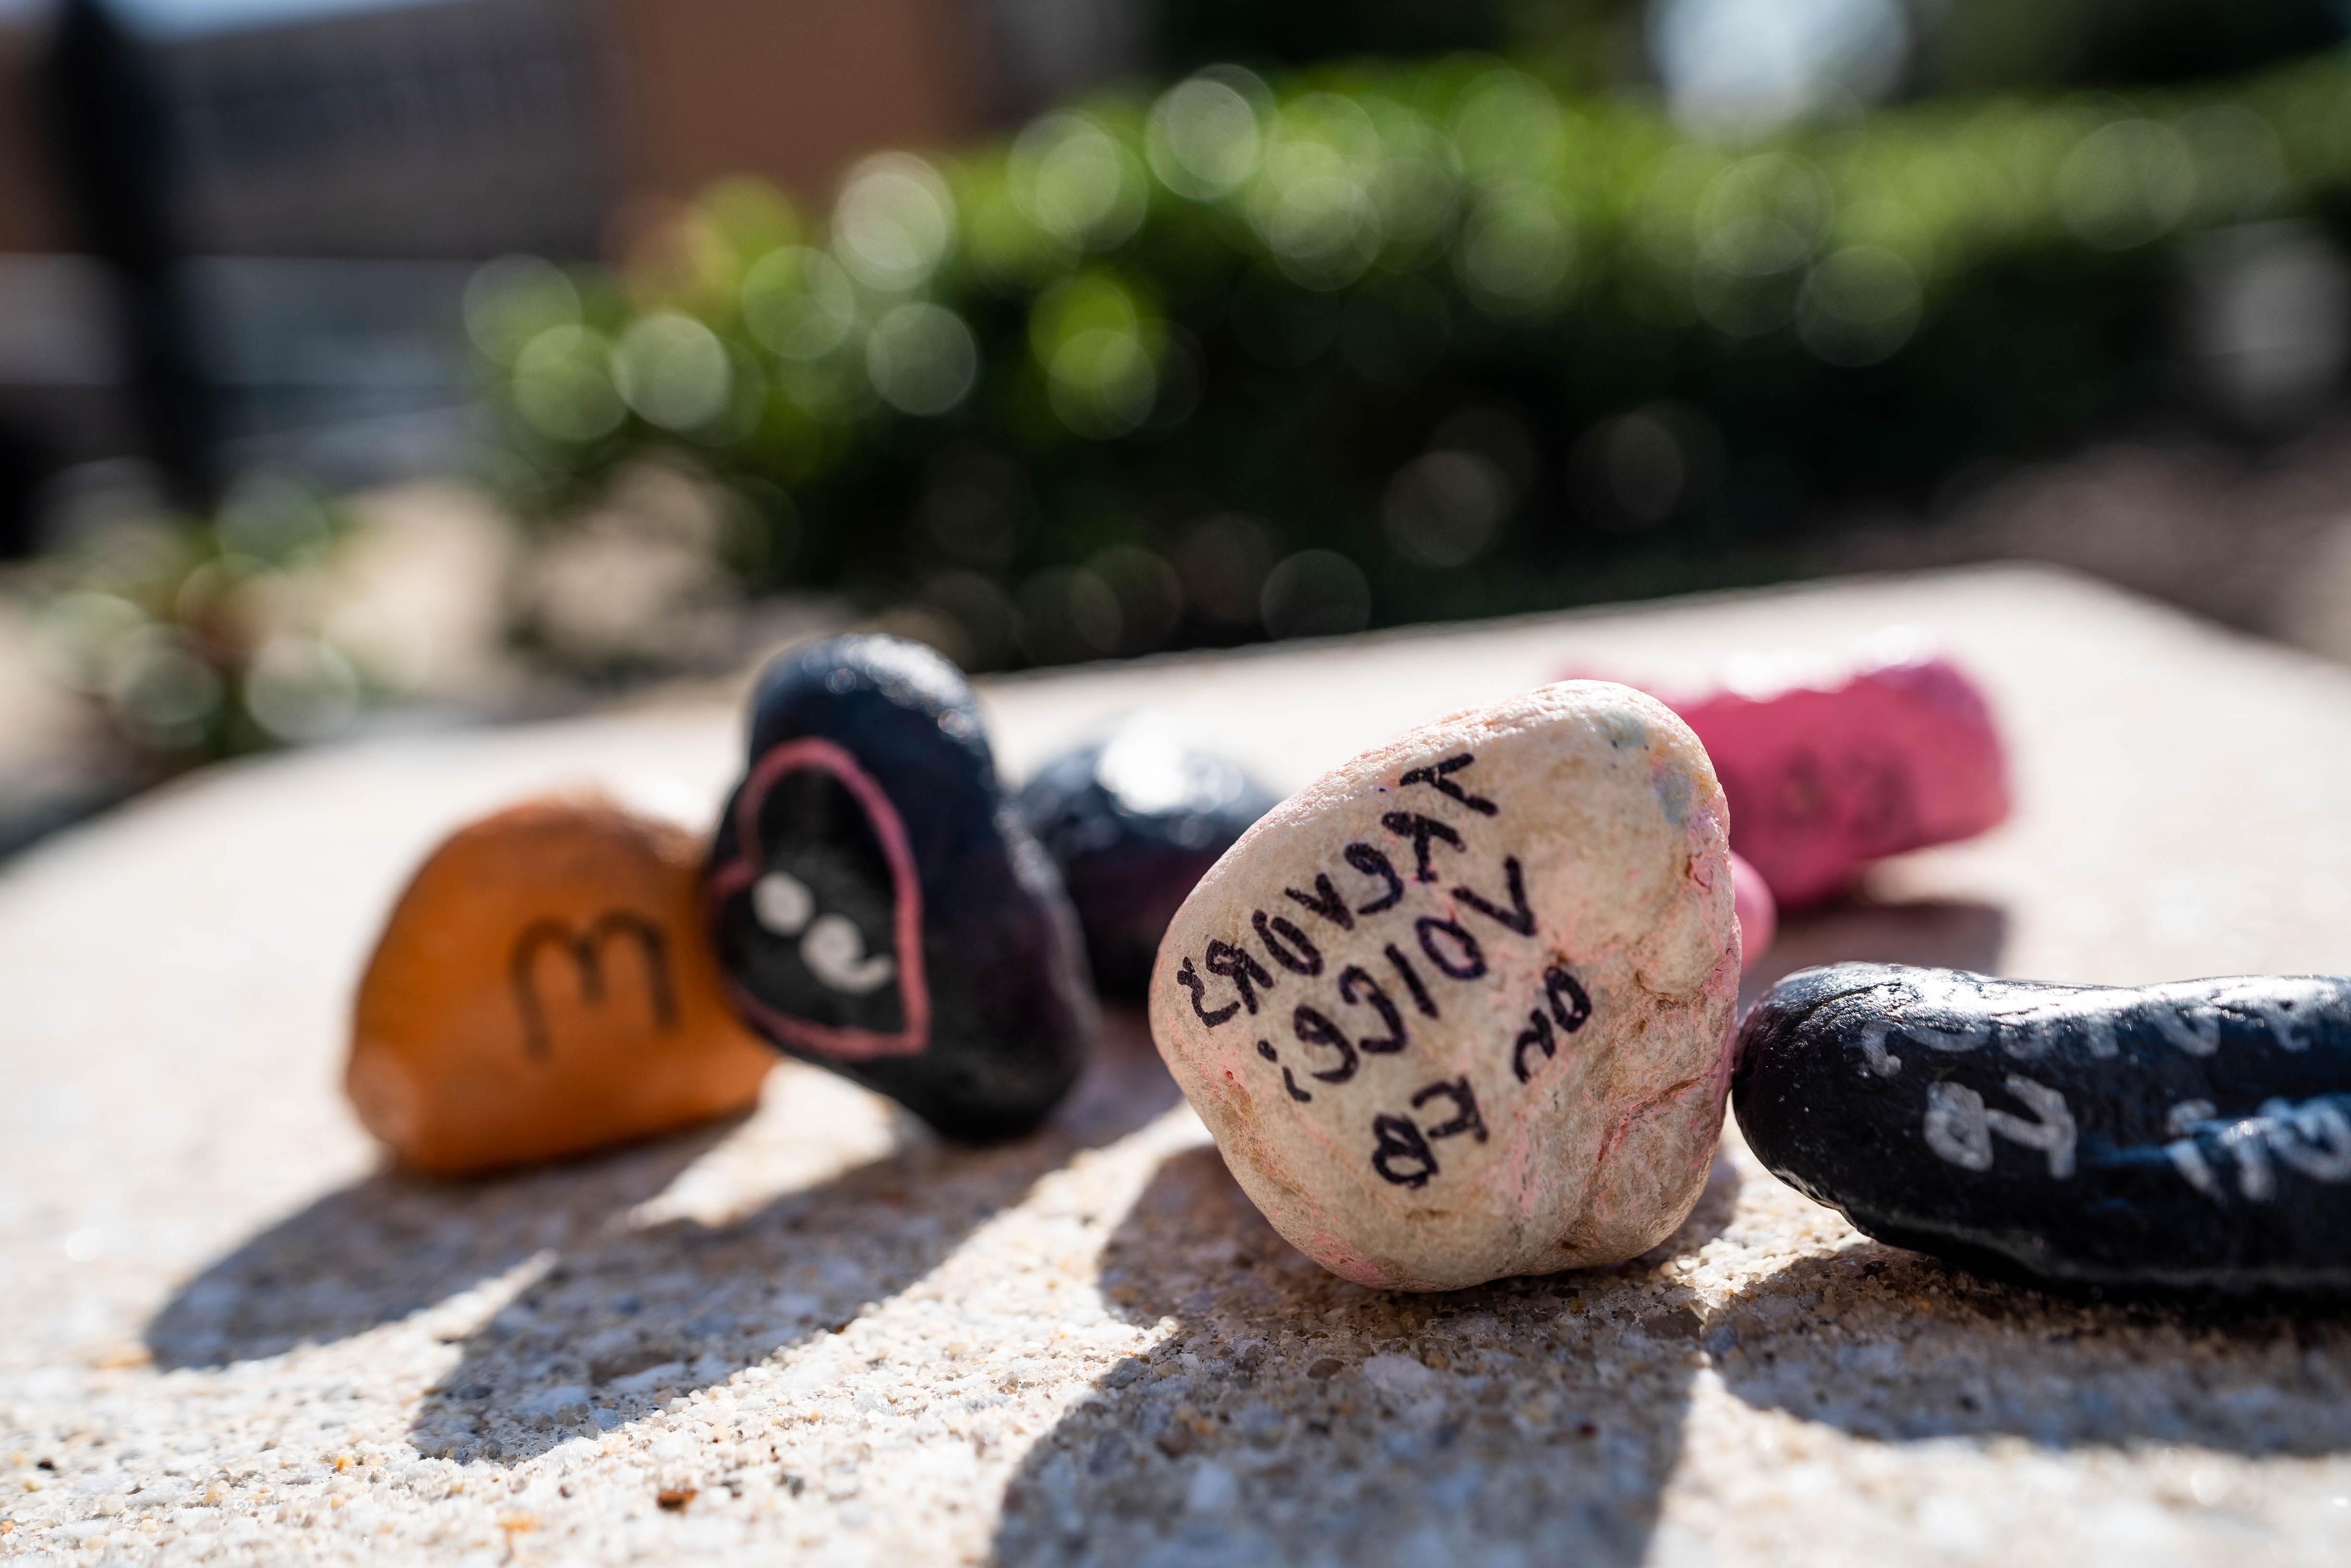 Painted stones with suicide-prevention messages